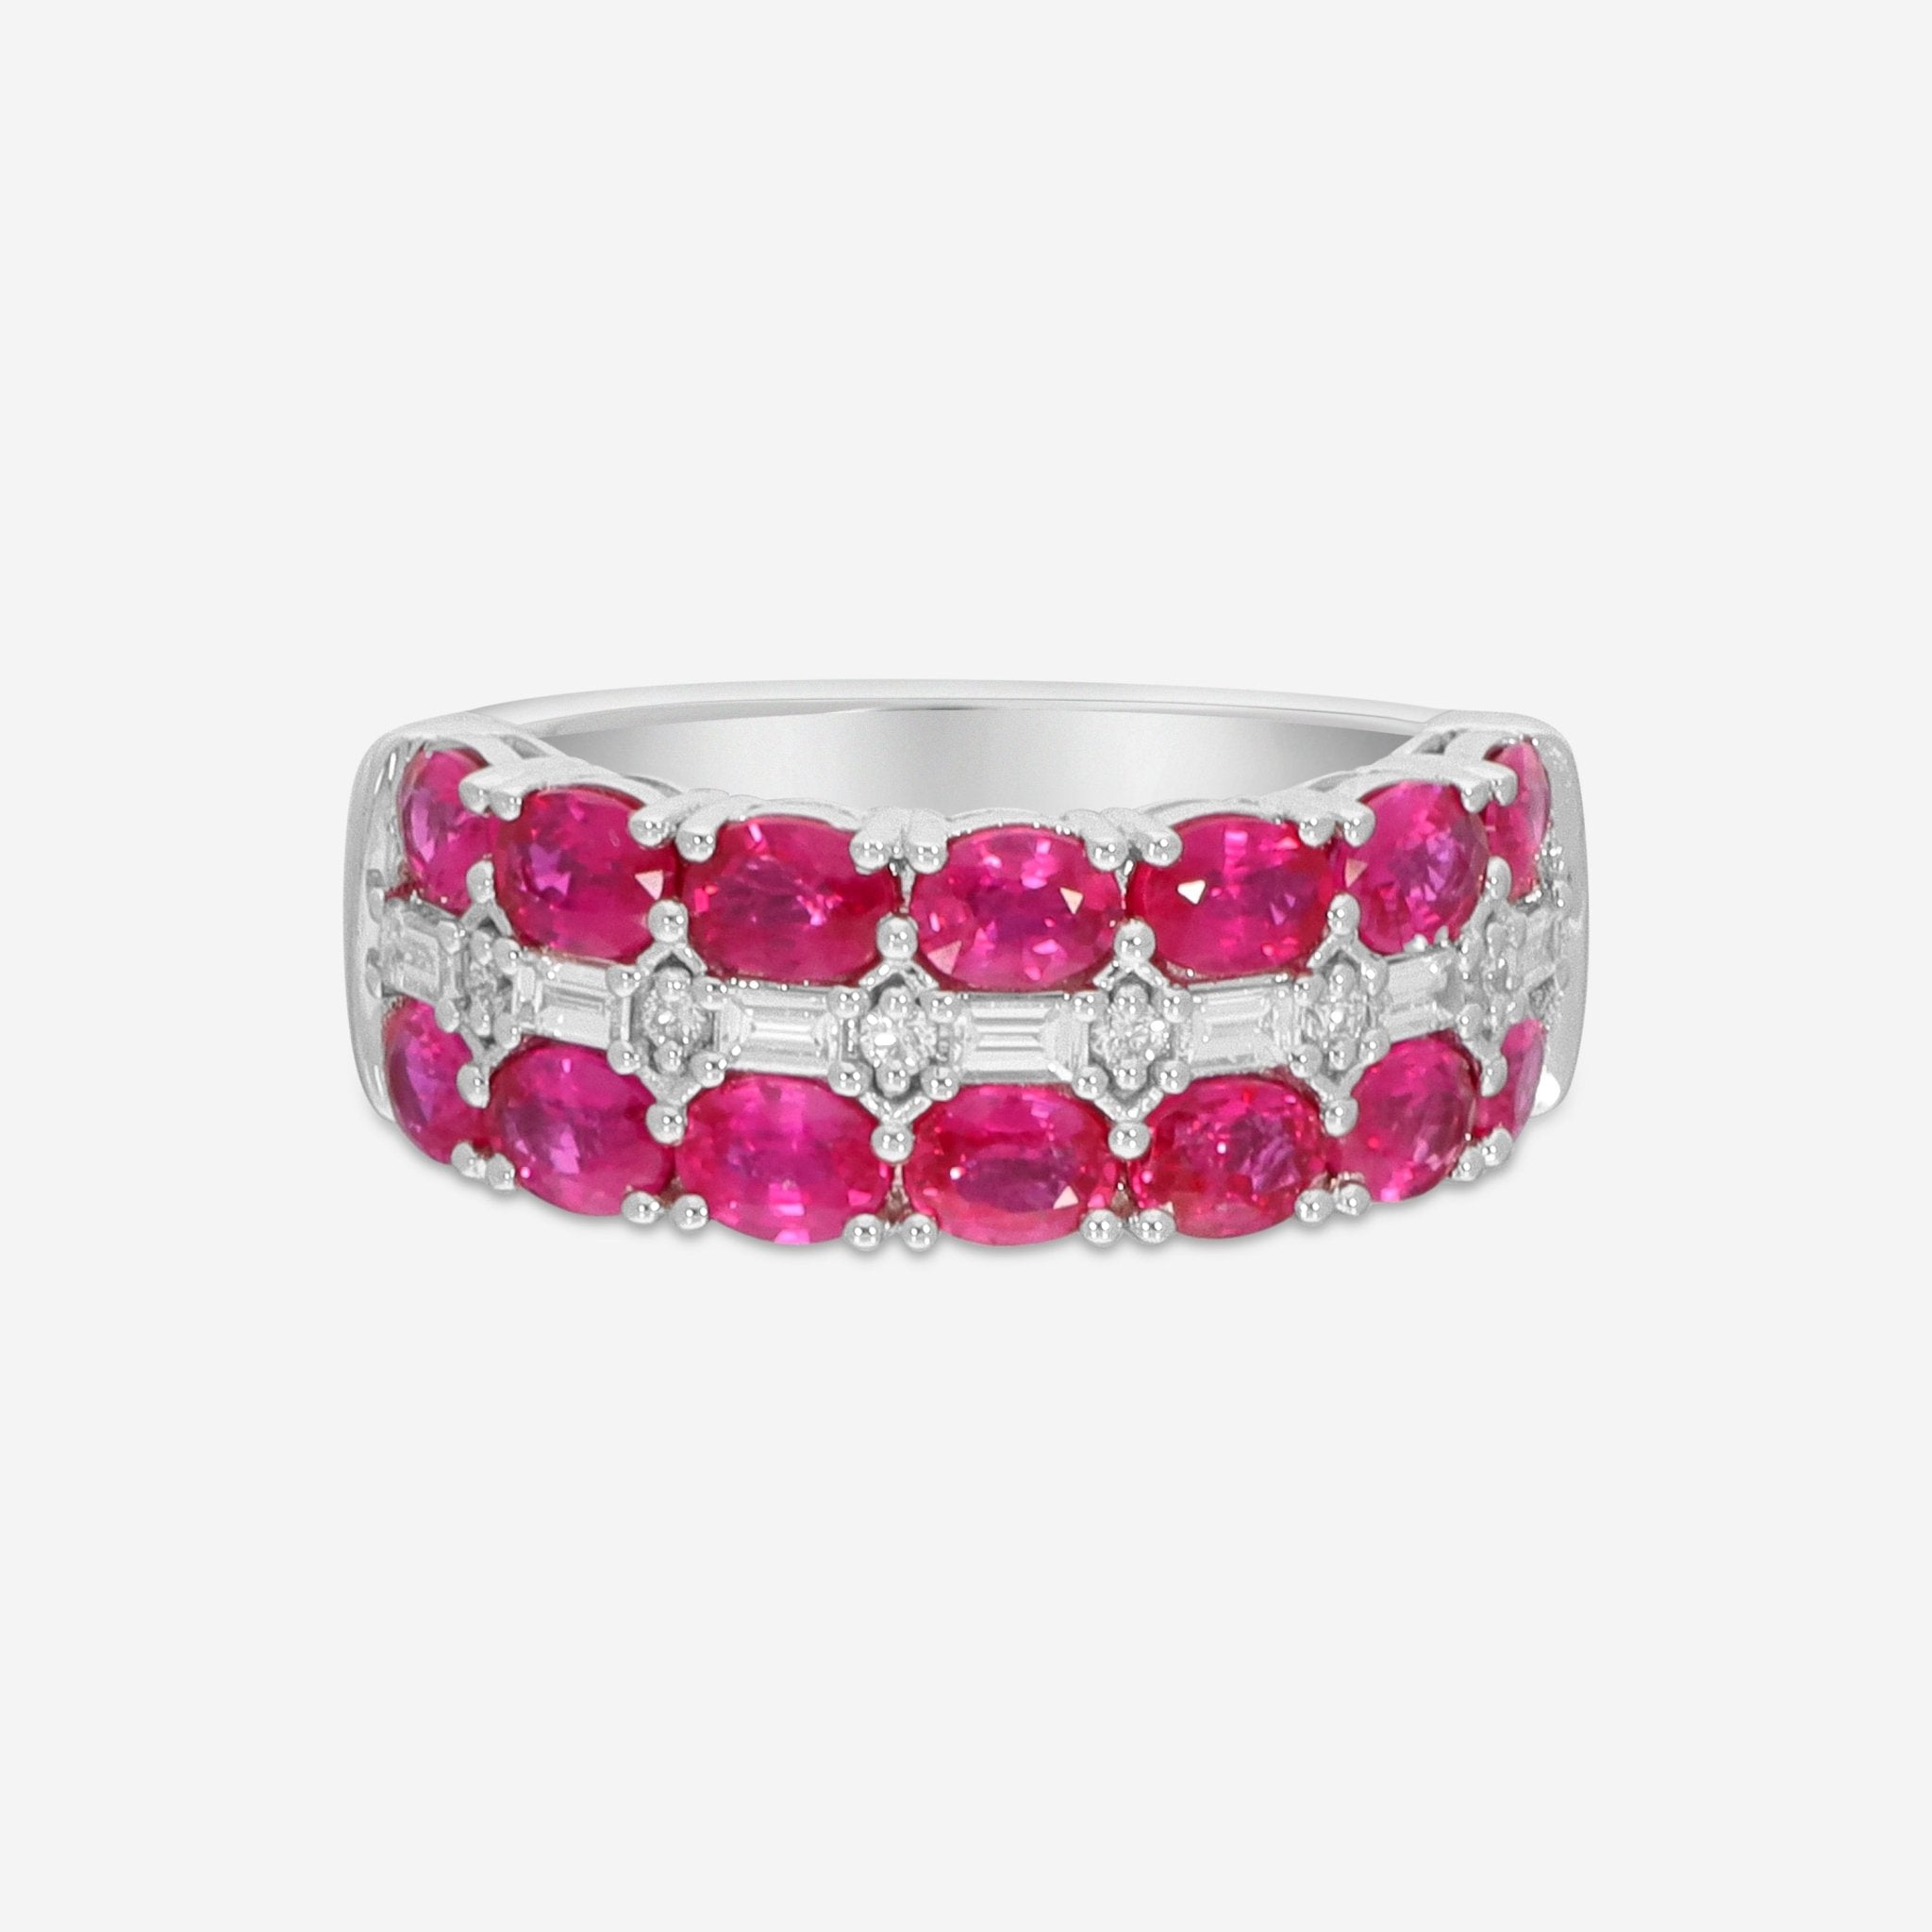 Ina Mar 14K White Gold 0.32ct.tw Diamonds and 2.81ct.tw Ruby Ring IMKGK43 - THE SOLIST - Ina Mar